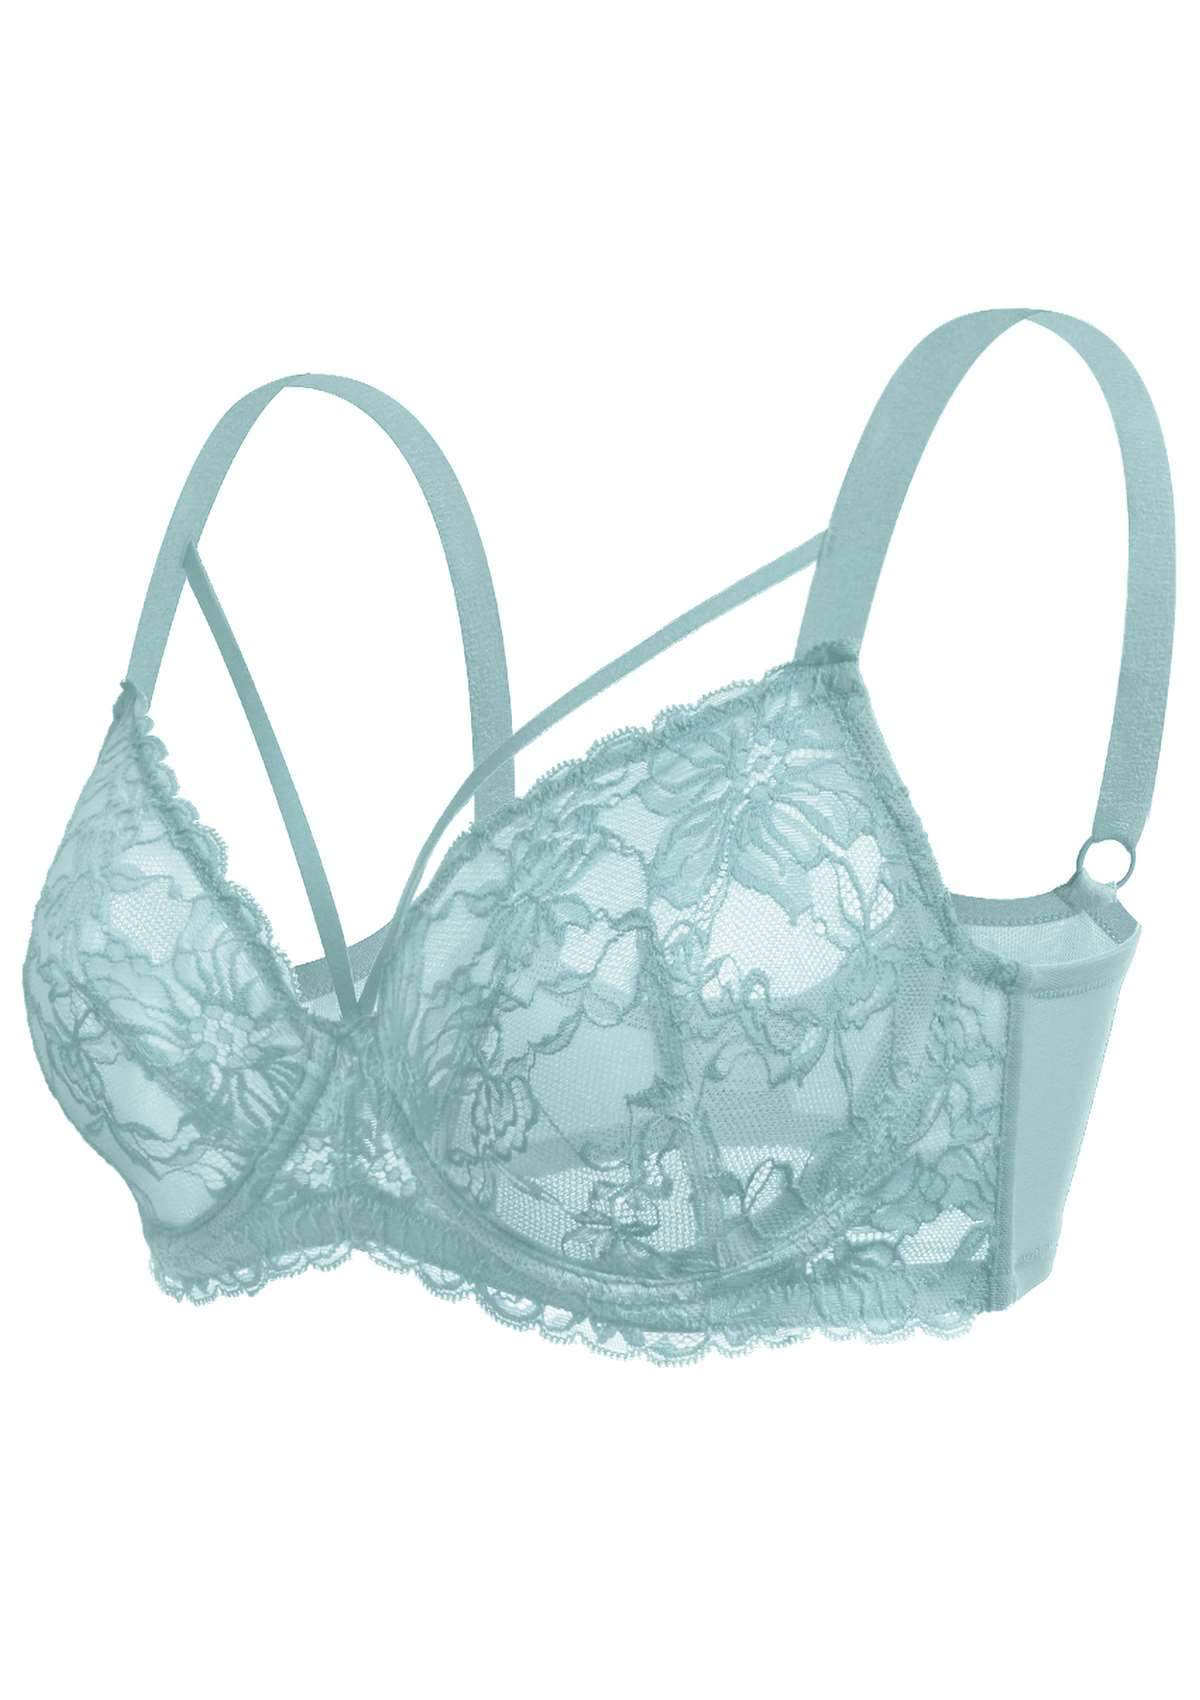 HSIA Pretty In Petals Unlined Lace Bra: Comfortable And Supportive Bra - Crystal Blue / 40 / DDD/F